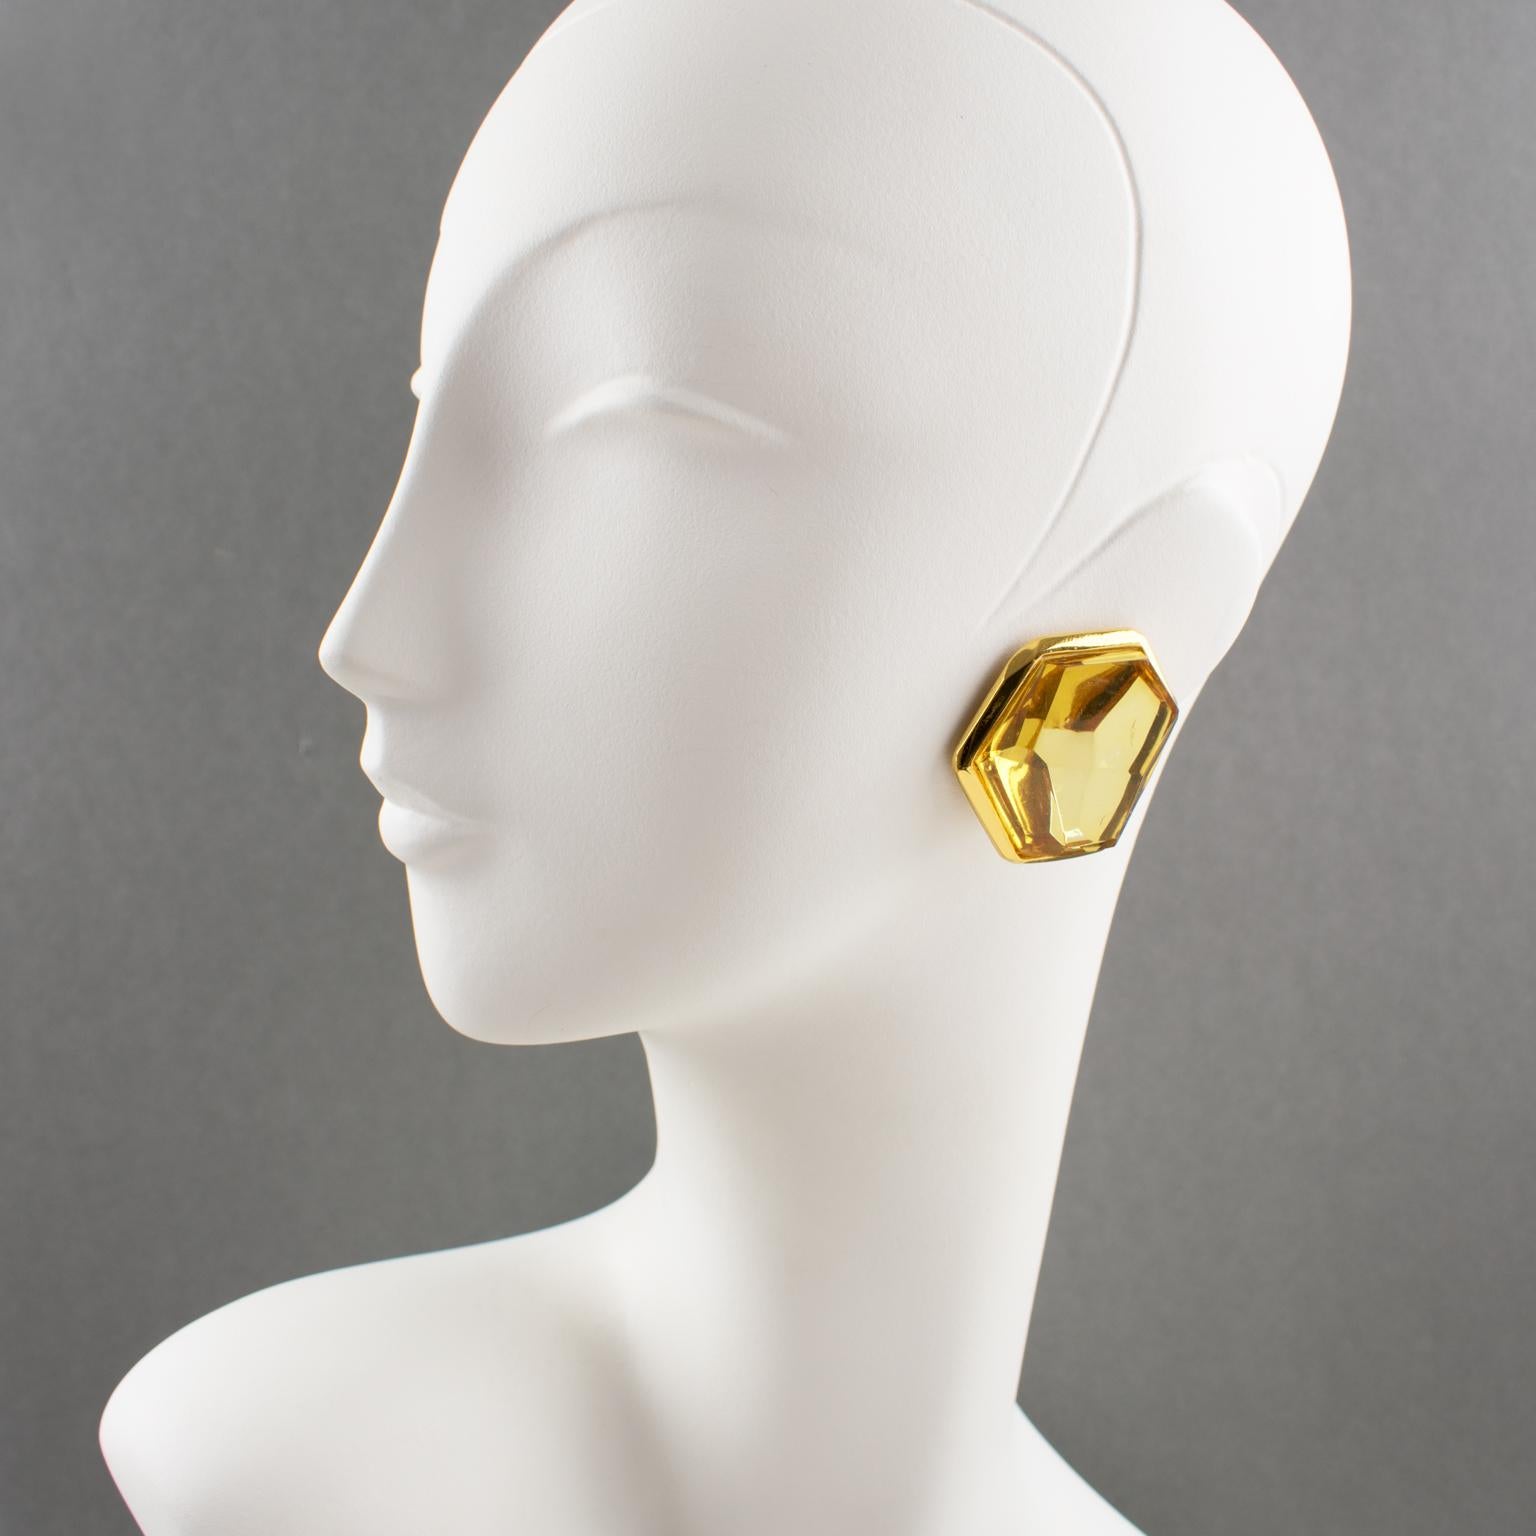 Exquisite French designer Jean Louis Scherrer Paris signed clip-on earrings. Featuring large dimensional rock shape, with a gilt metal frame and yellow champagne faceted resin cabochon. Signed underside with gilded tag: 